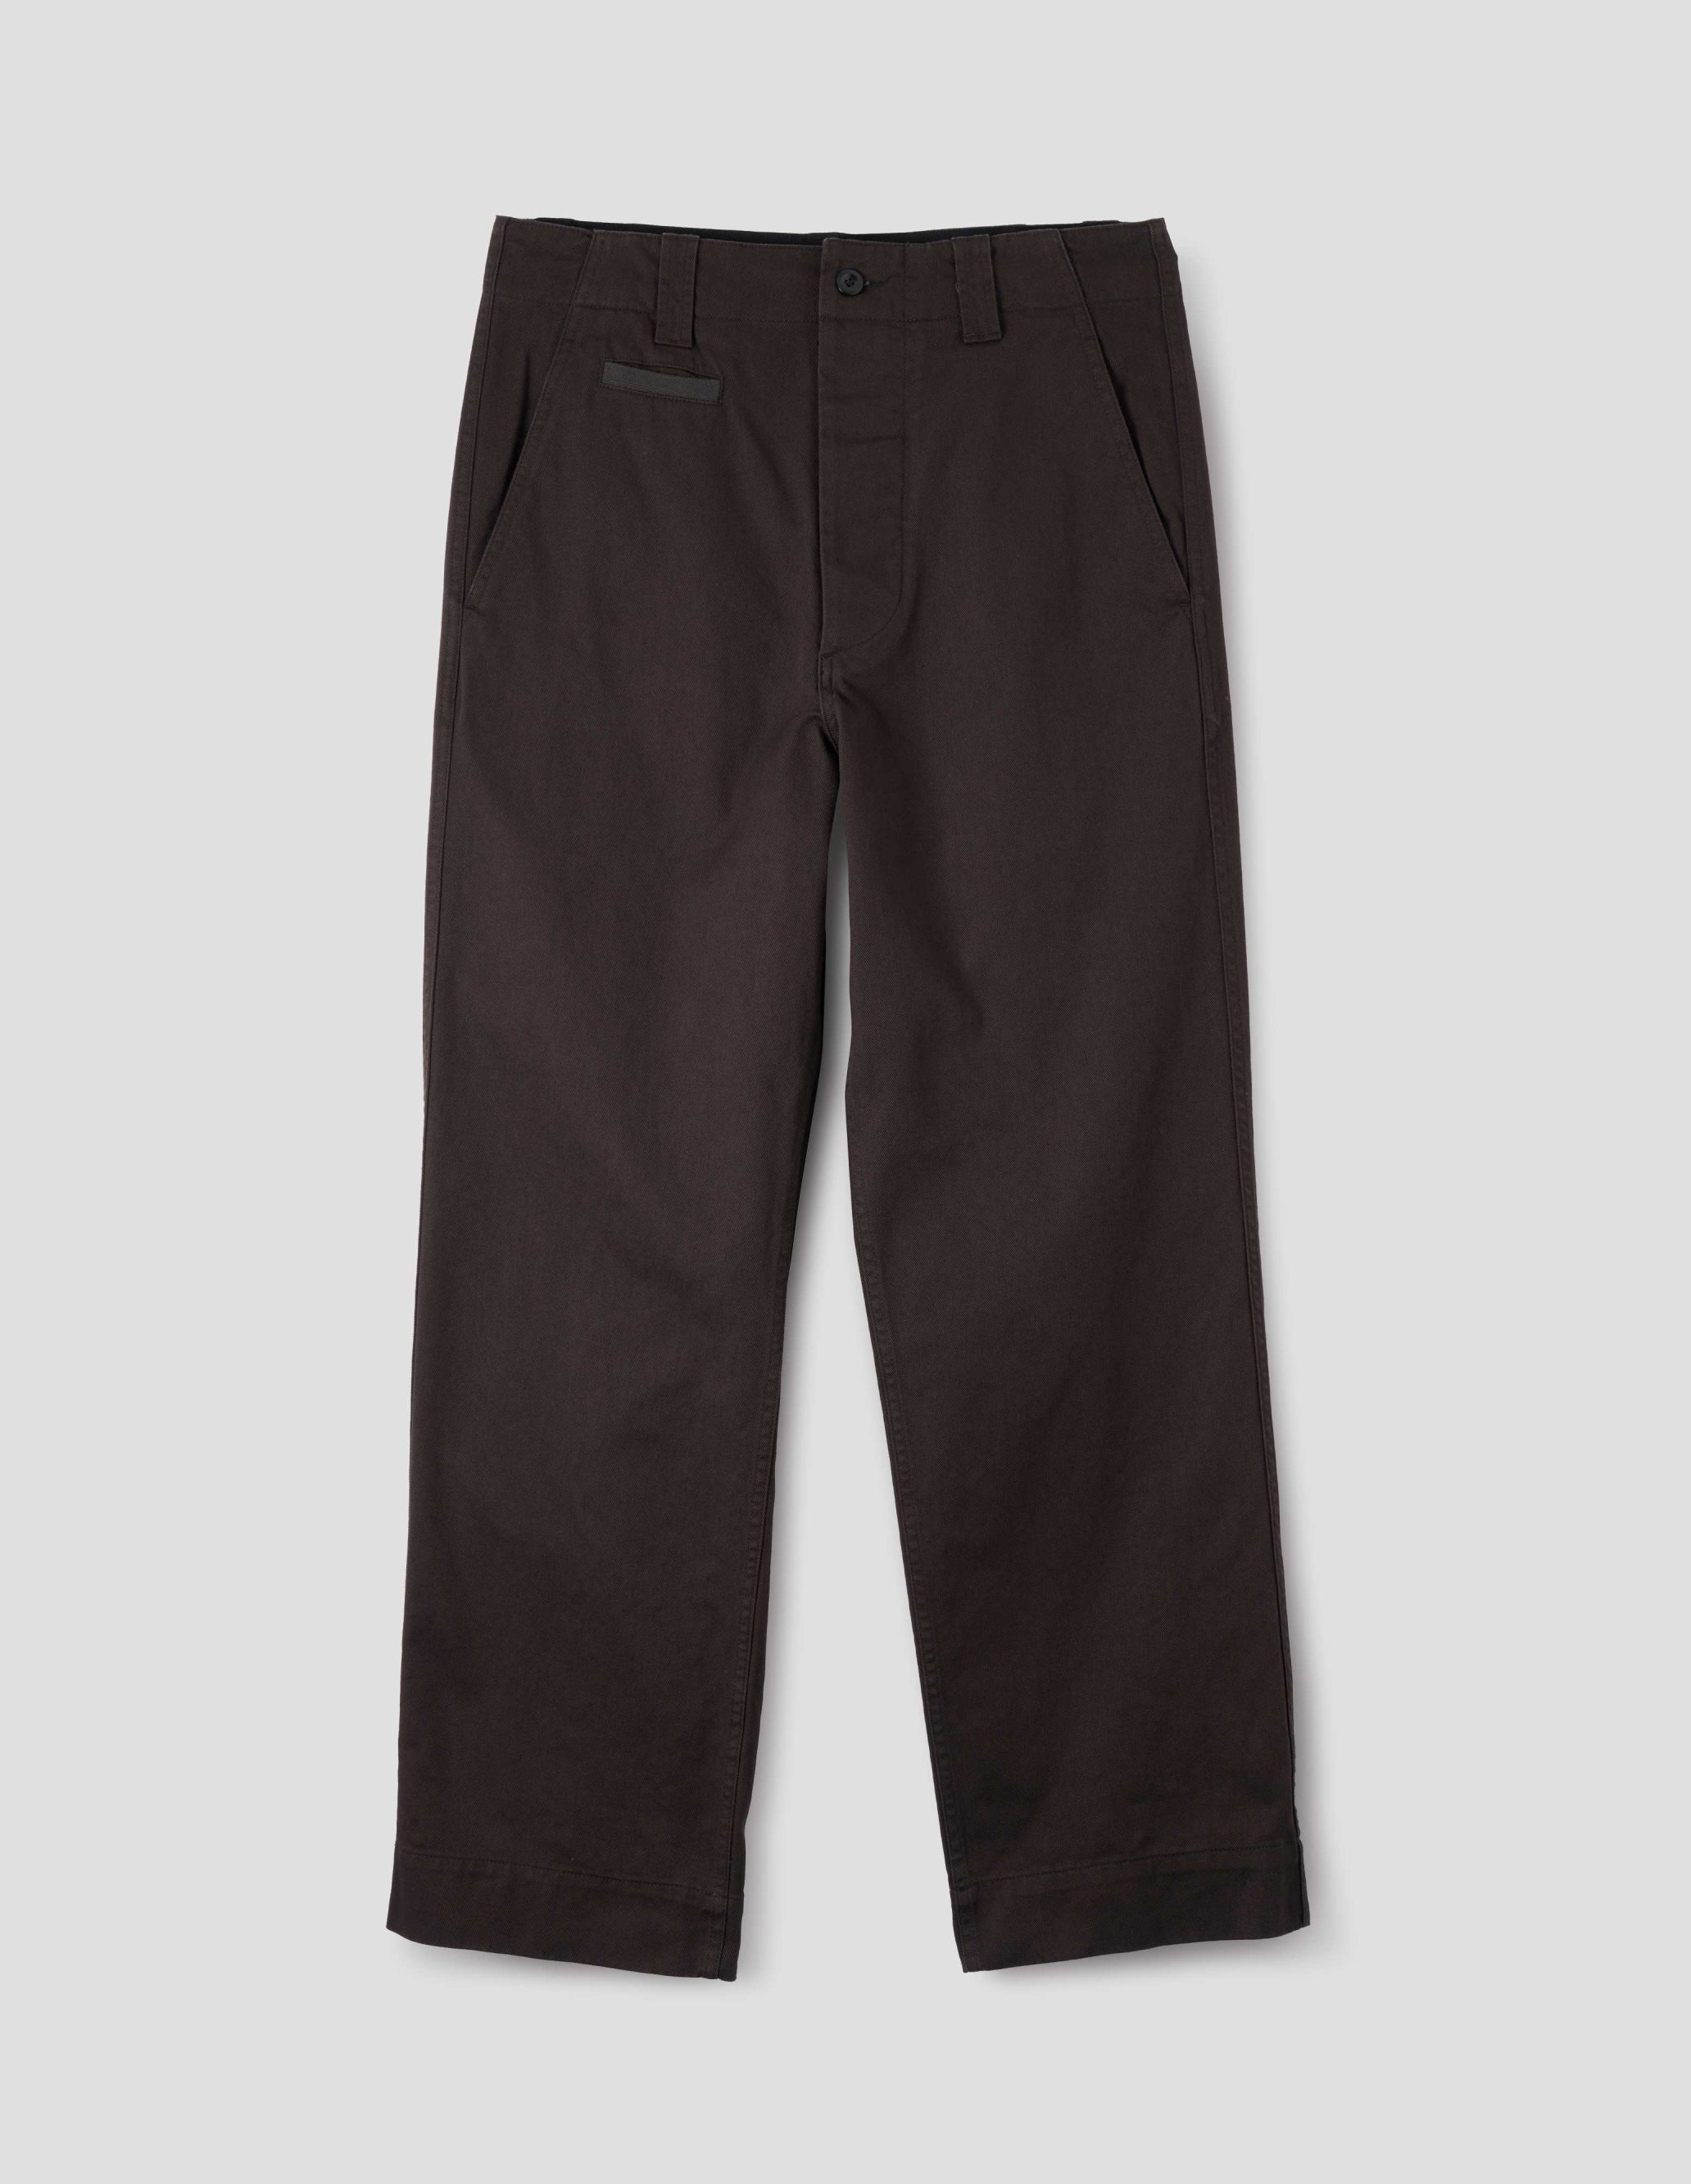 MARGARET HOWELL - Ebony soft cotton drill chino | MHL. by Margaret Howell